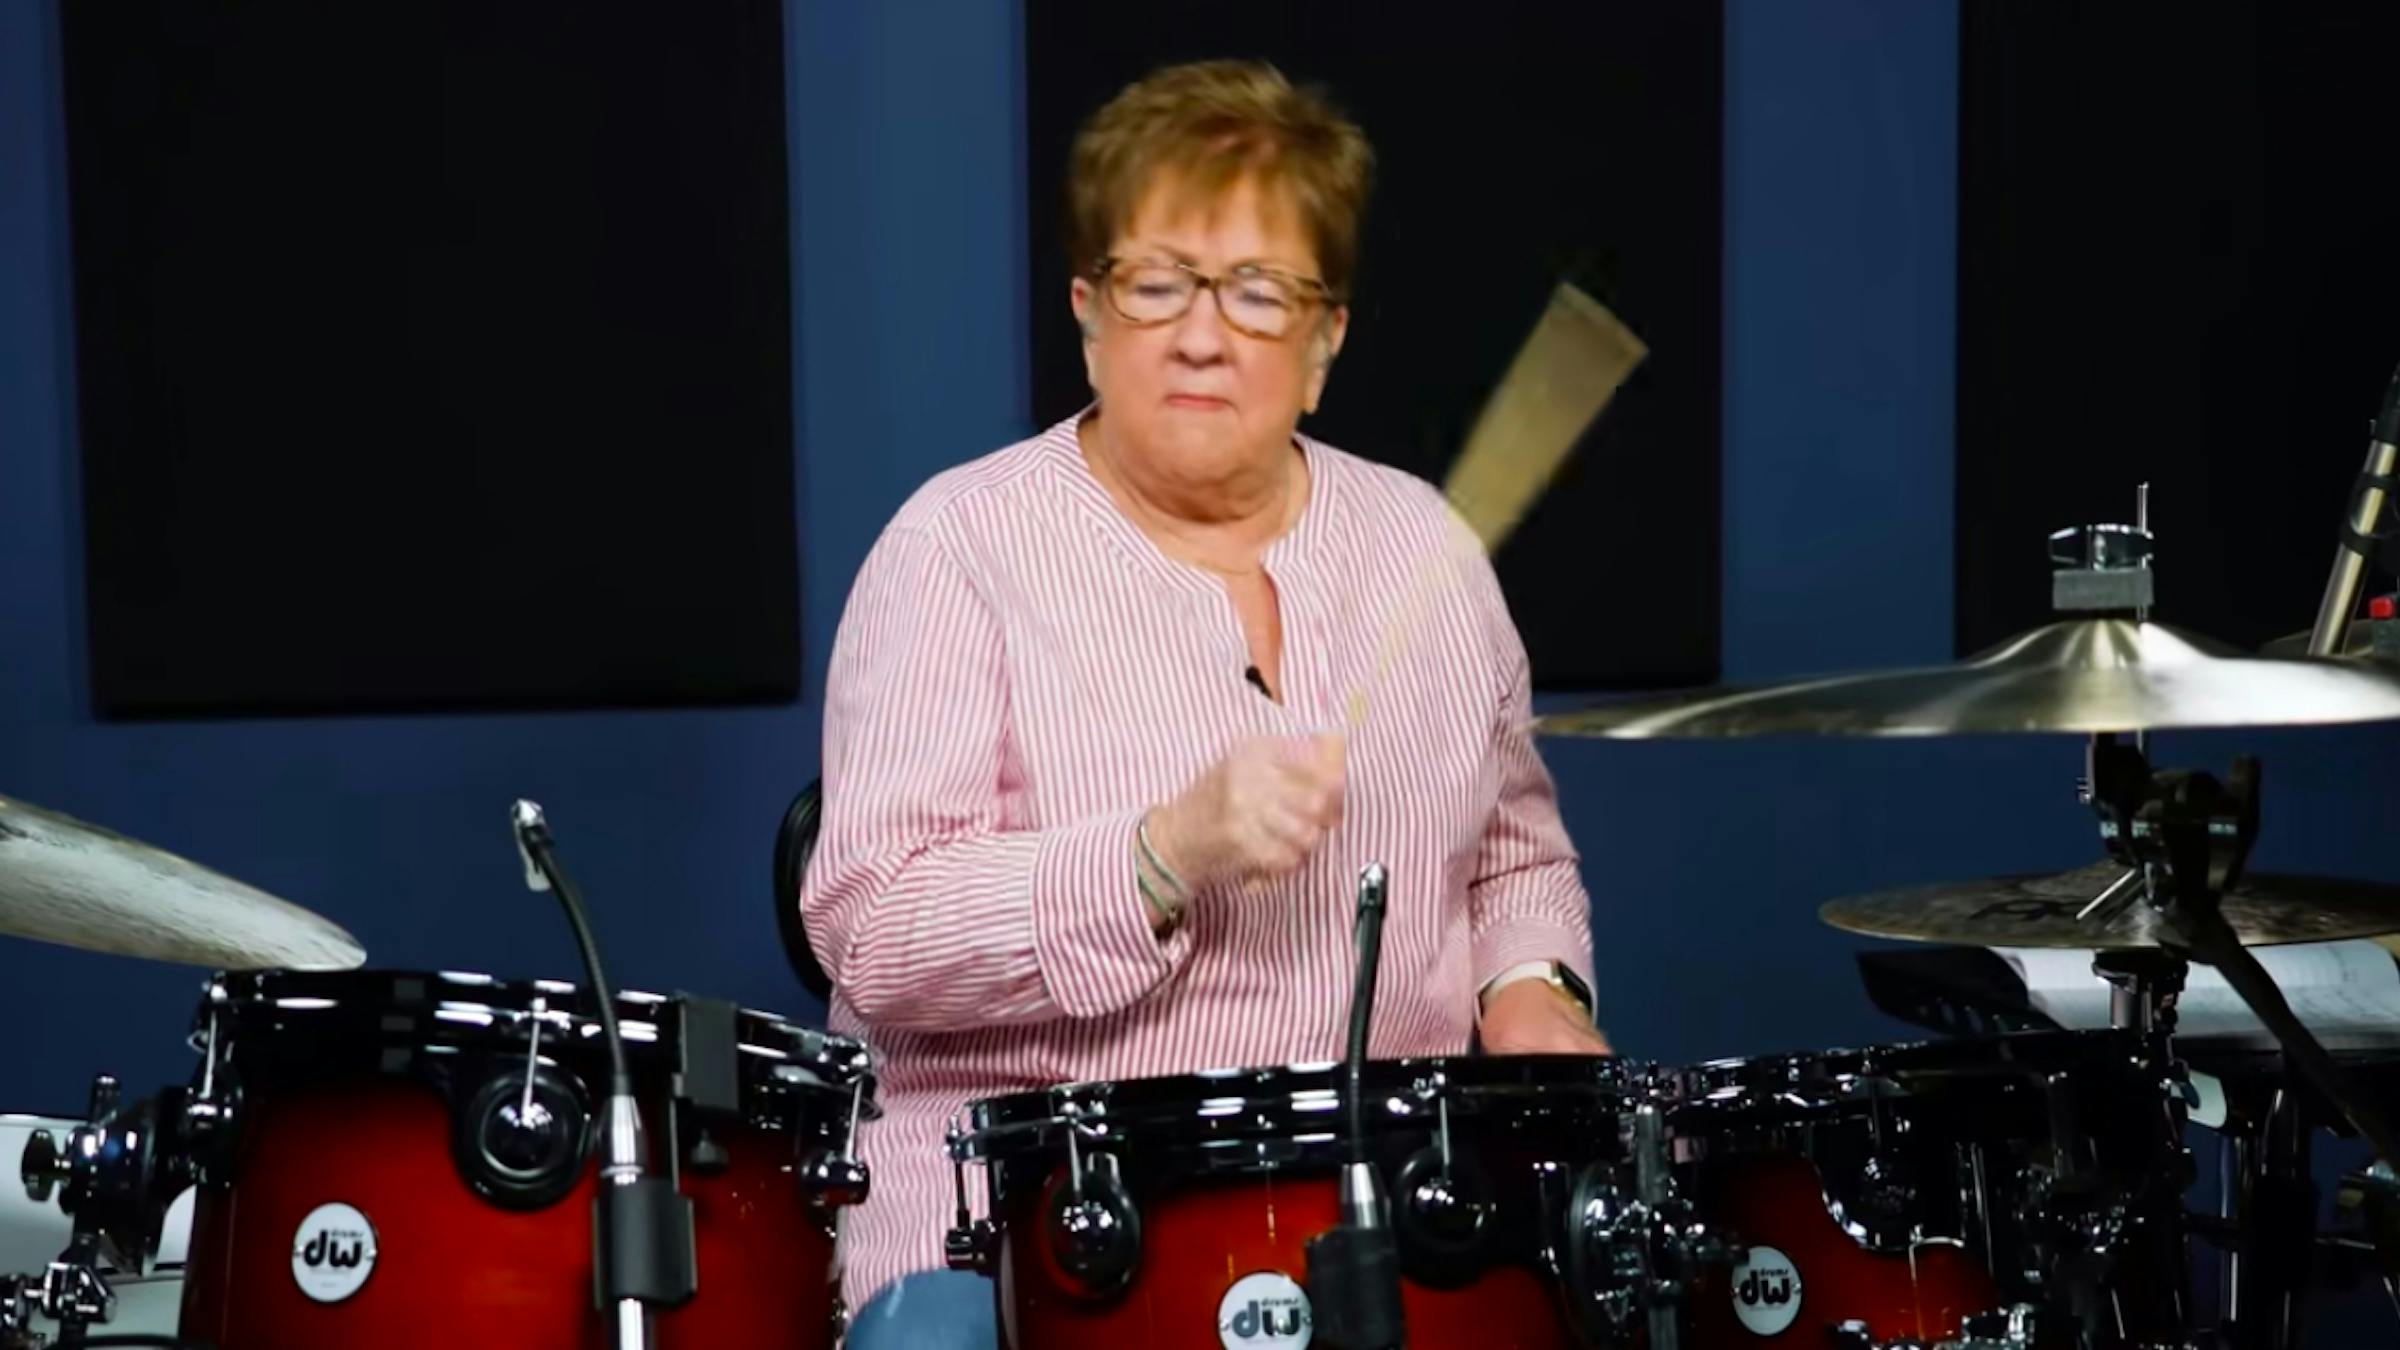 This Grandma's Drum Cover Of Disturbed Punches Ageism In The Face